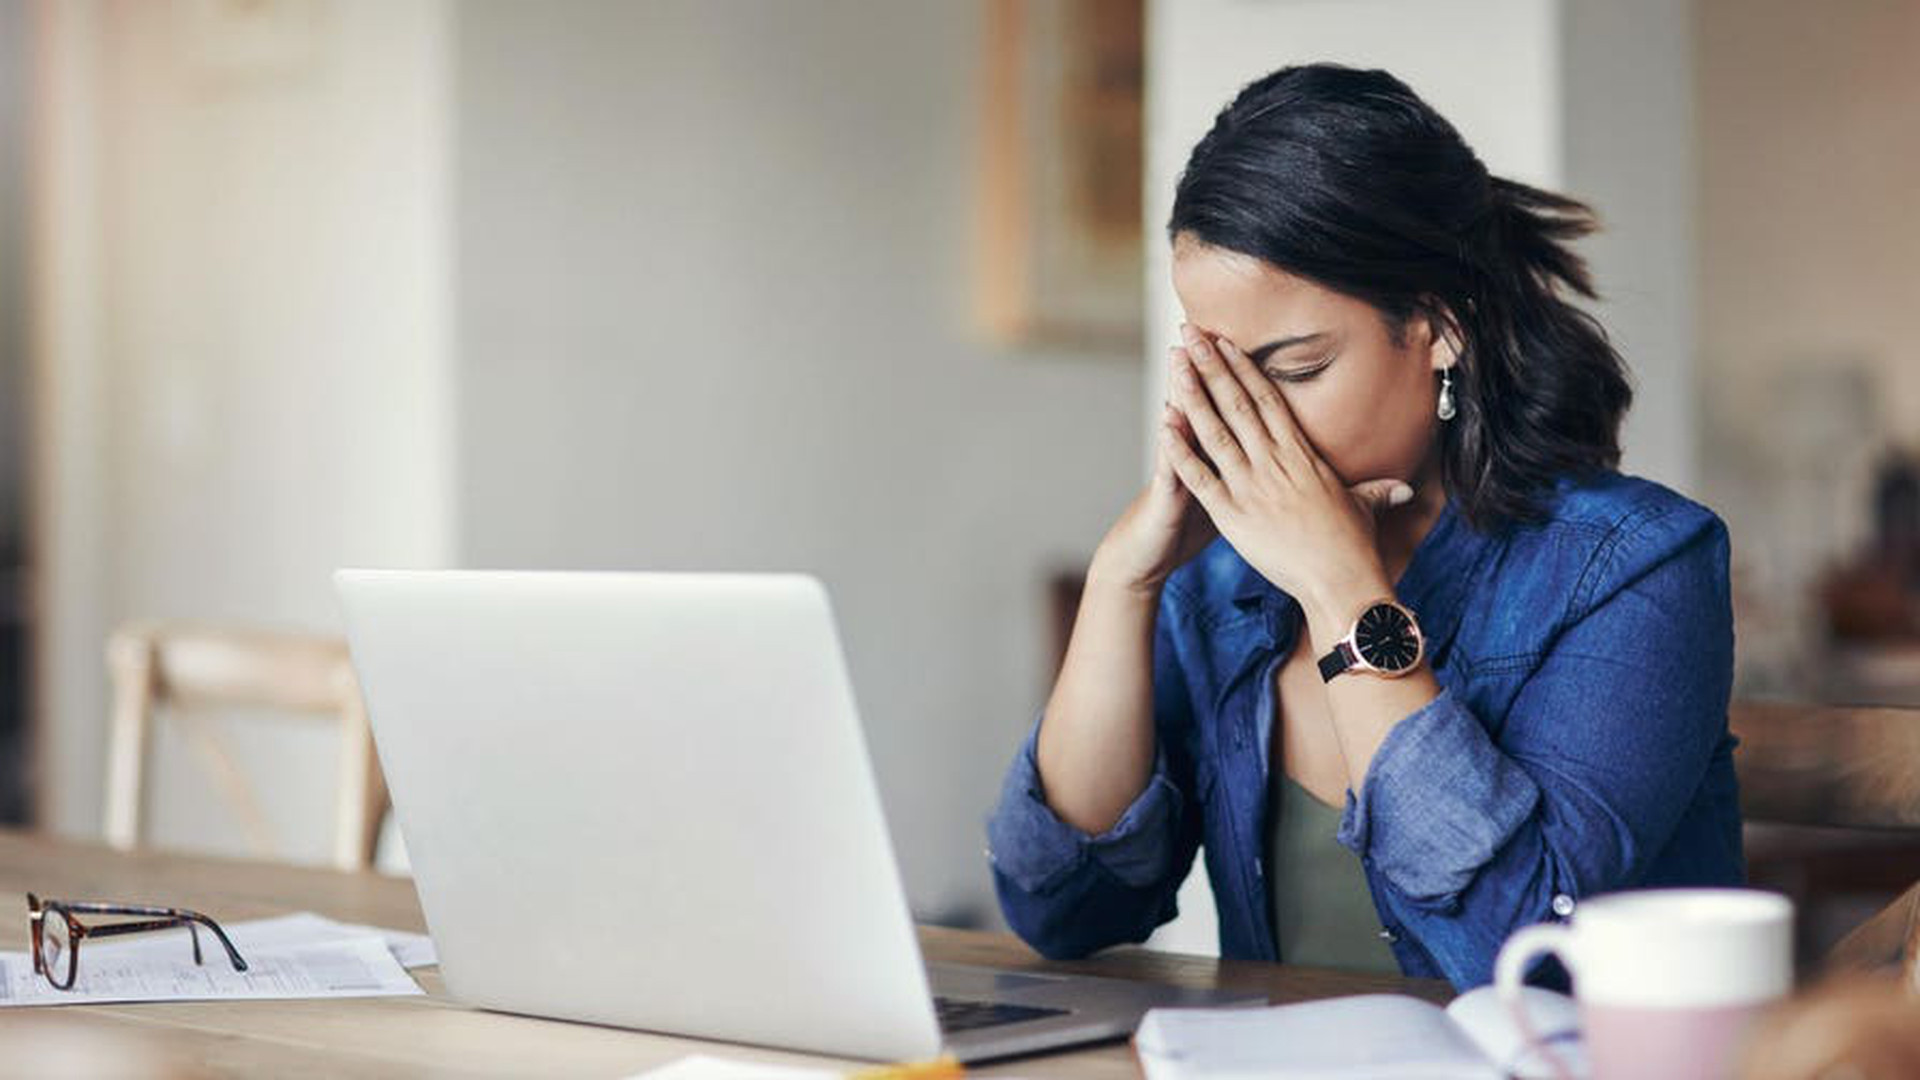 5 Mistakes Small Business Owners Make That’s Costing You Thousands